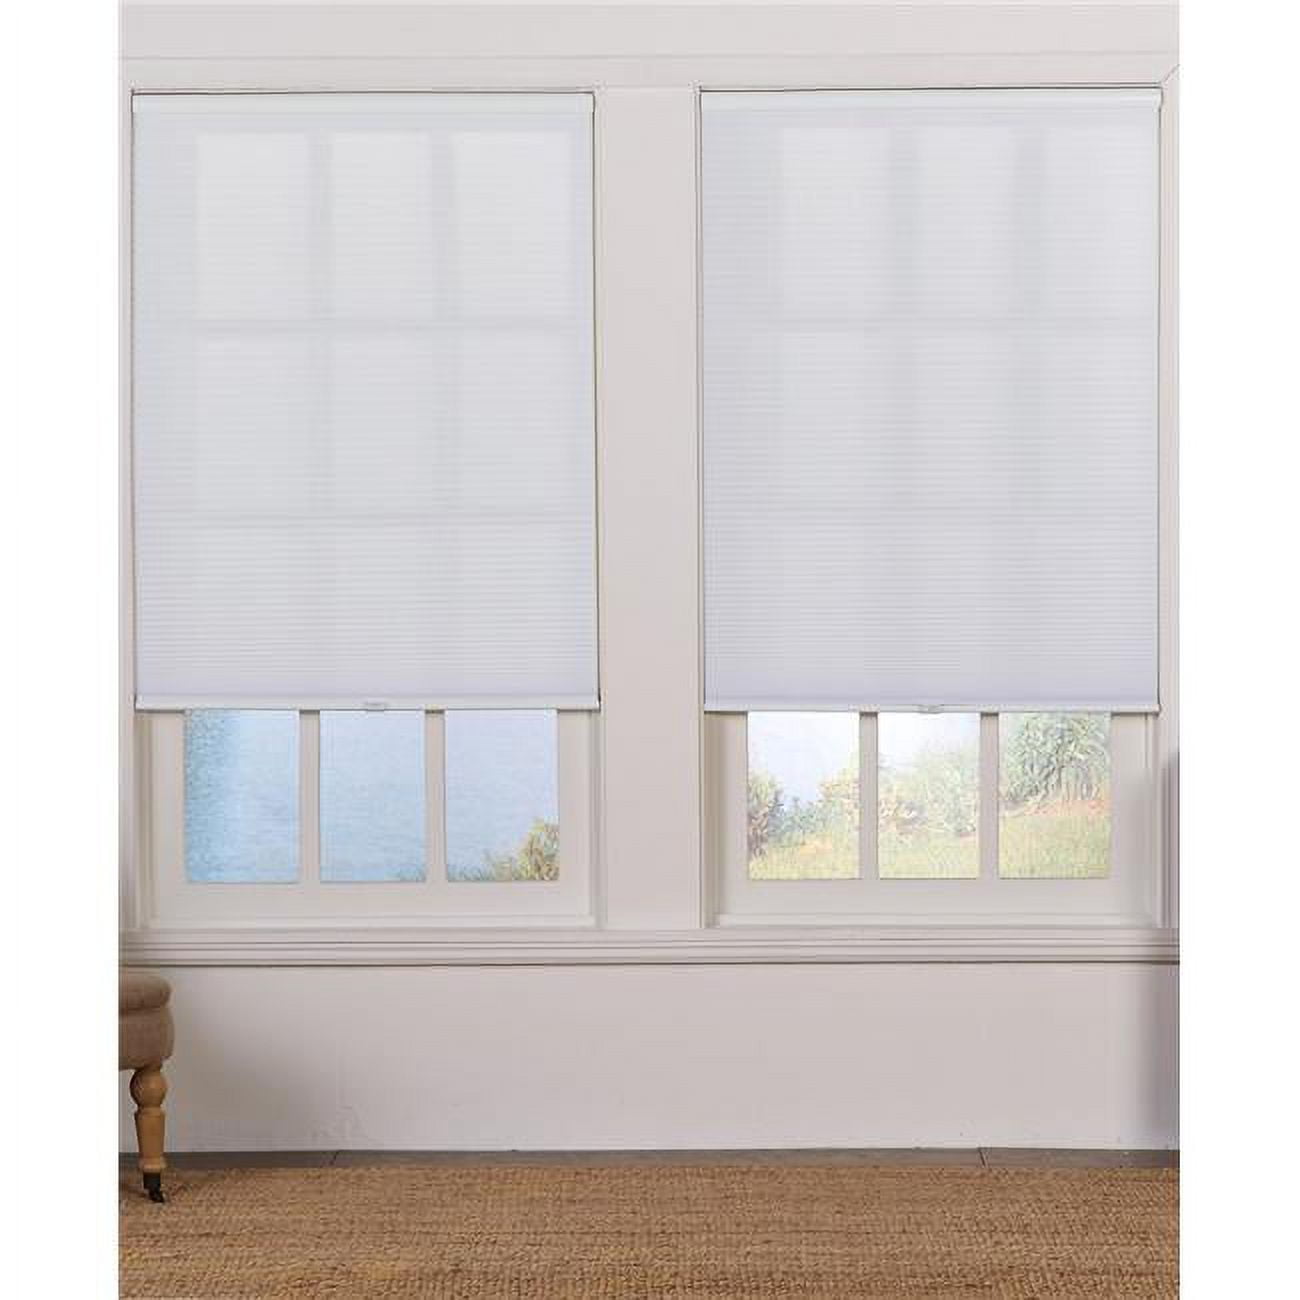 Ubc325x72wt Cordless Light Filtering Cellular Shade, White - 32.5 X 72 In.